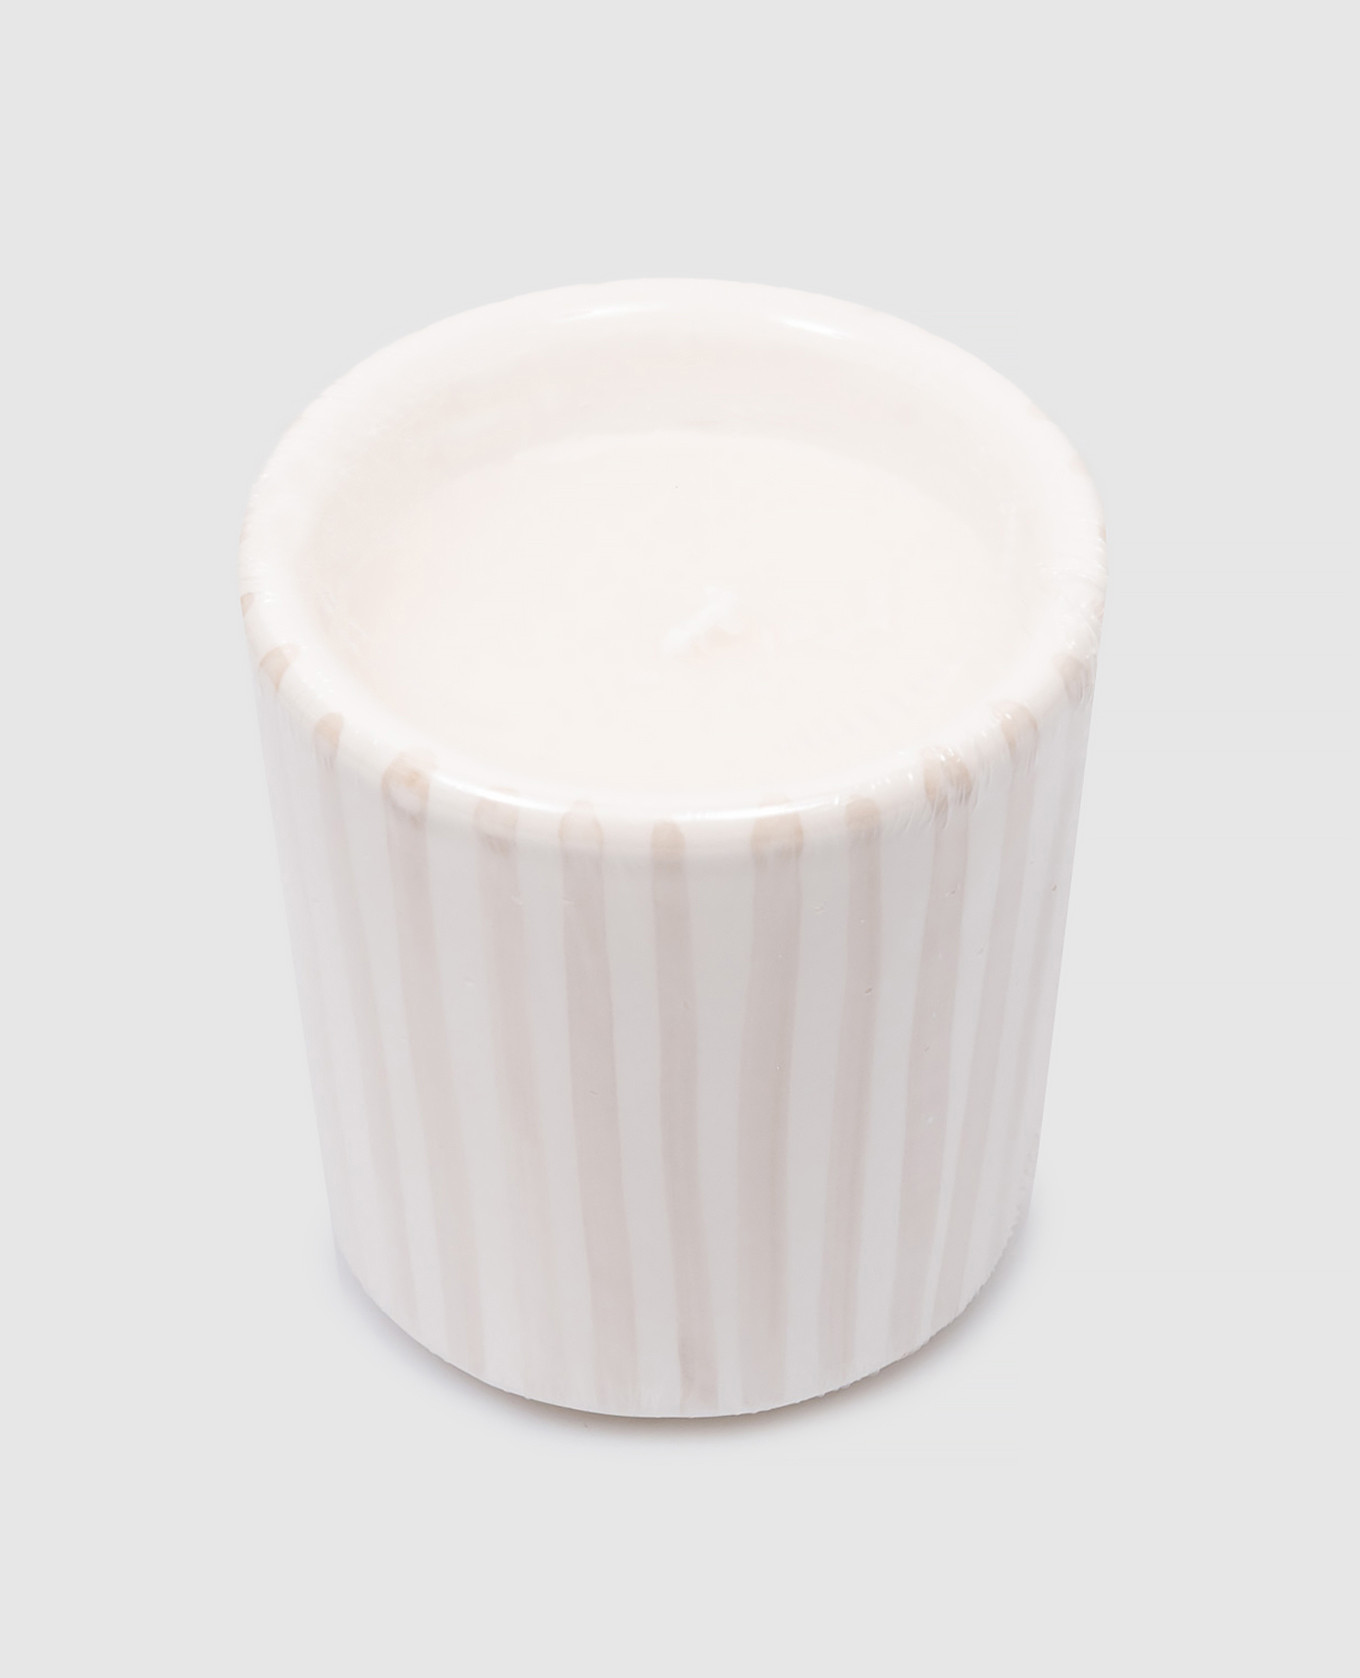 A white scented candle in a beige striped ceramic candle holder with a logo